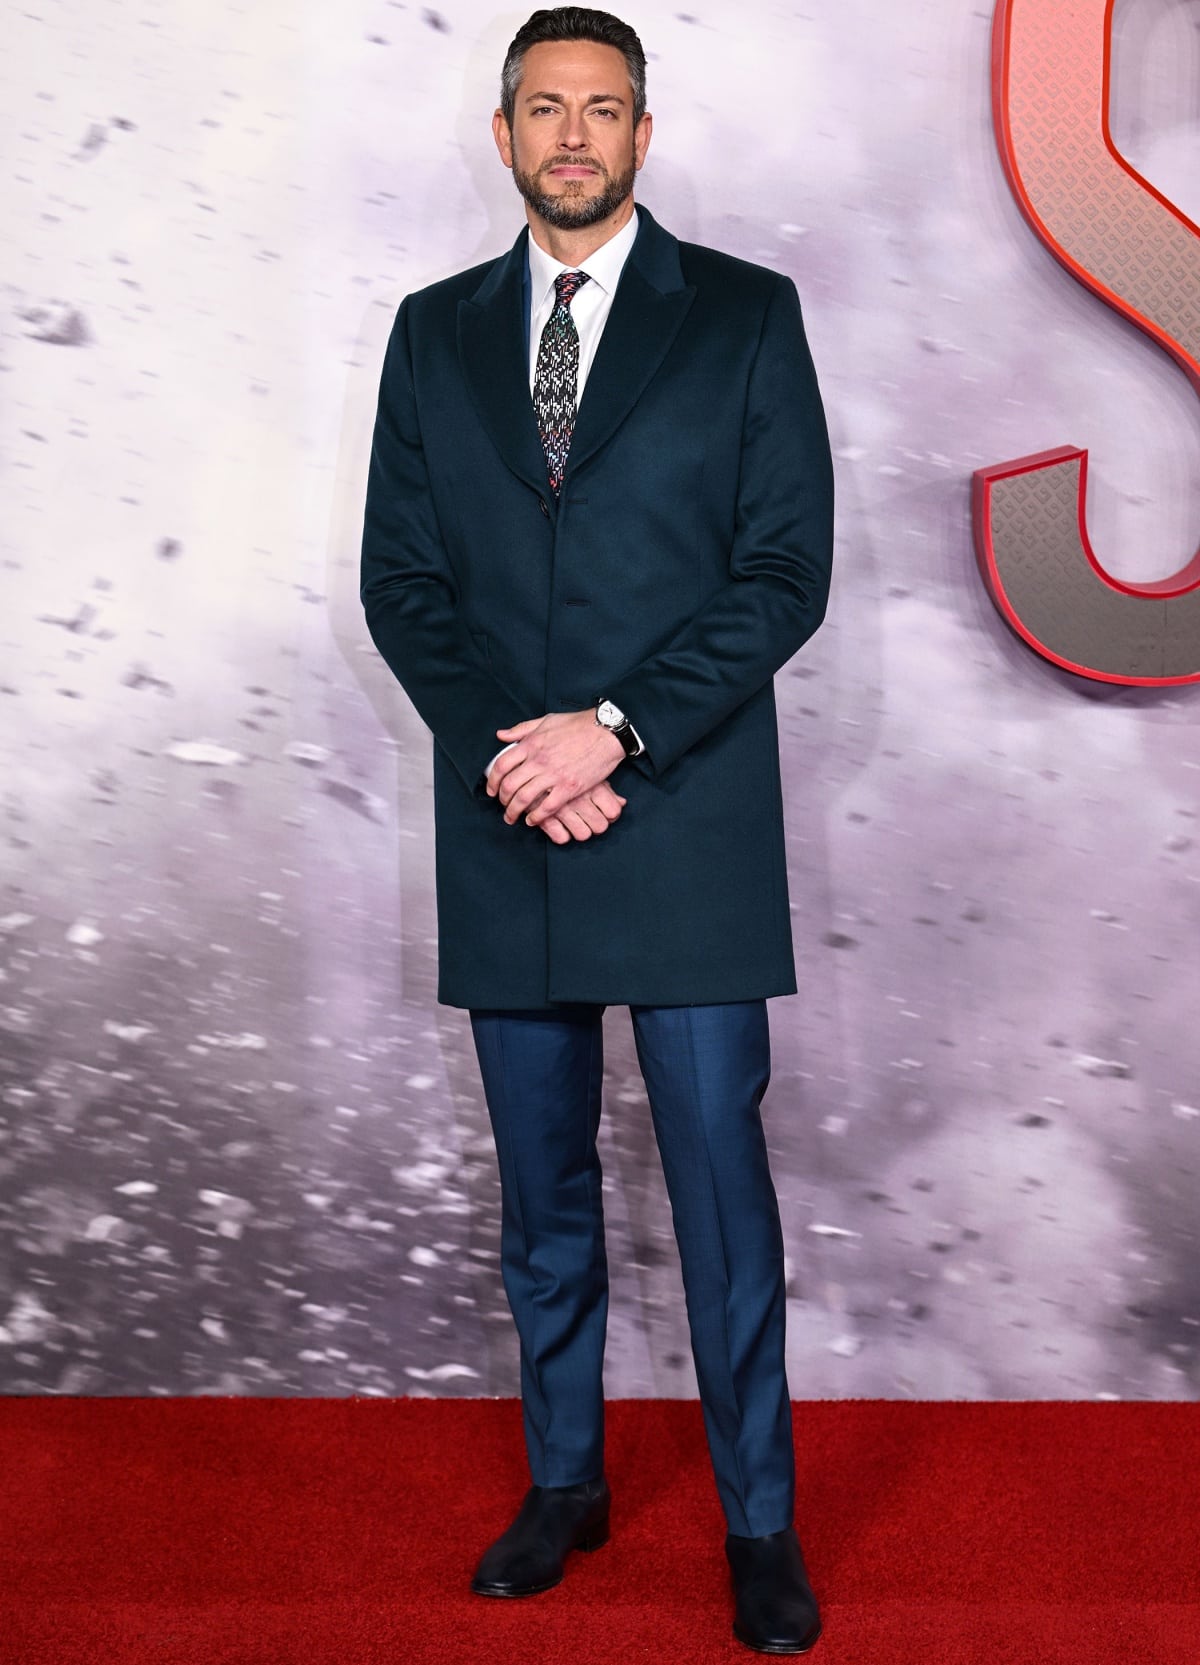 Zachary Levi stepped out in a Paul Smith suit with Christian Louboutin shoes at the UK premiere of Shazam! Fury of the Gods